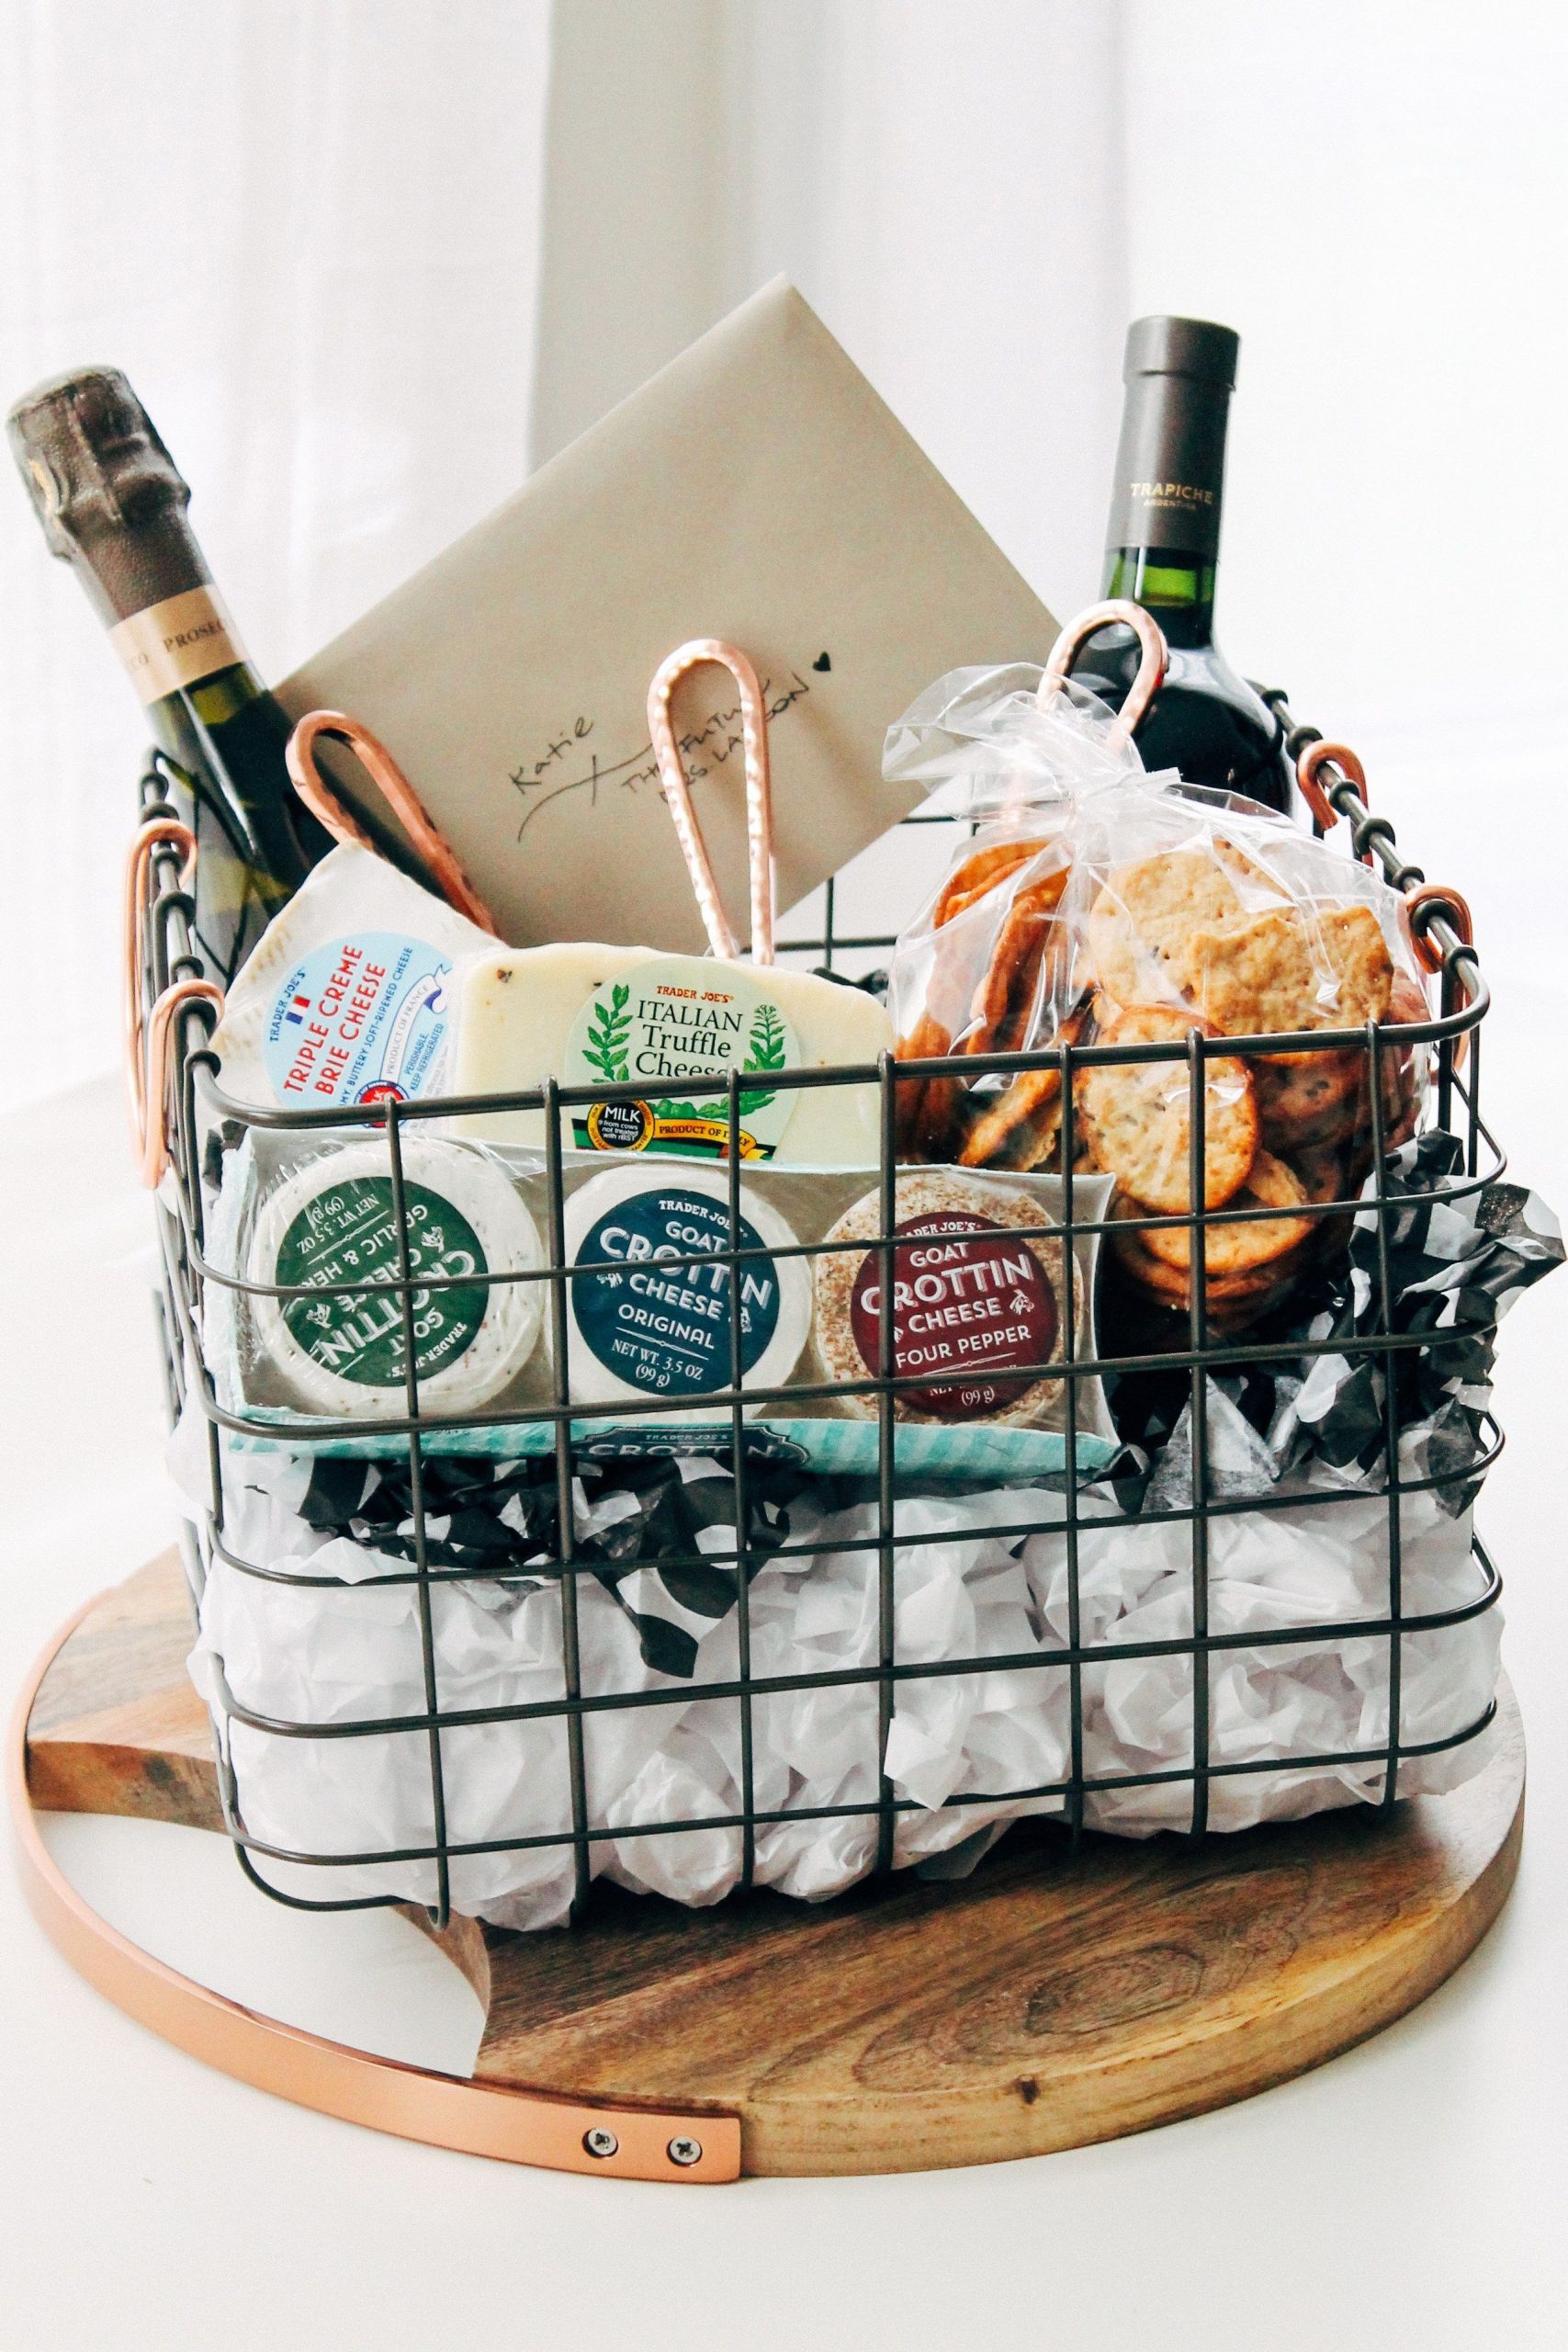 Kitchen Themed Gift Basket Ideas
 the ultimate cheese t basket playswellwithbutter